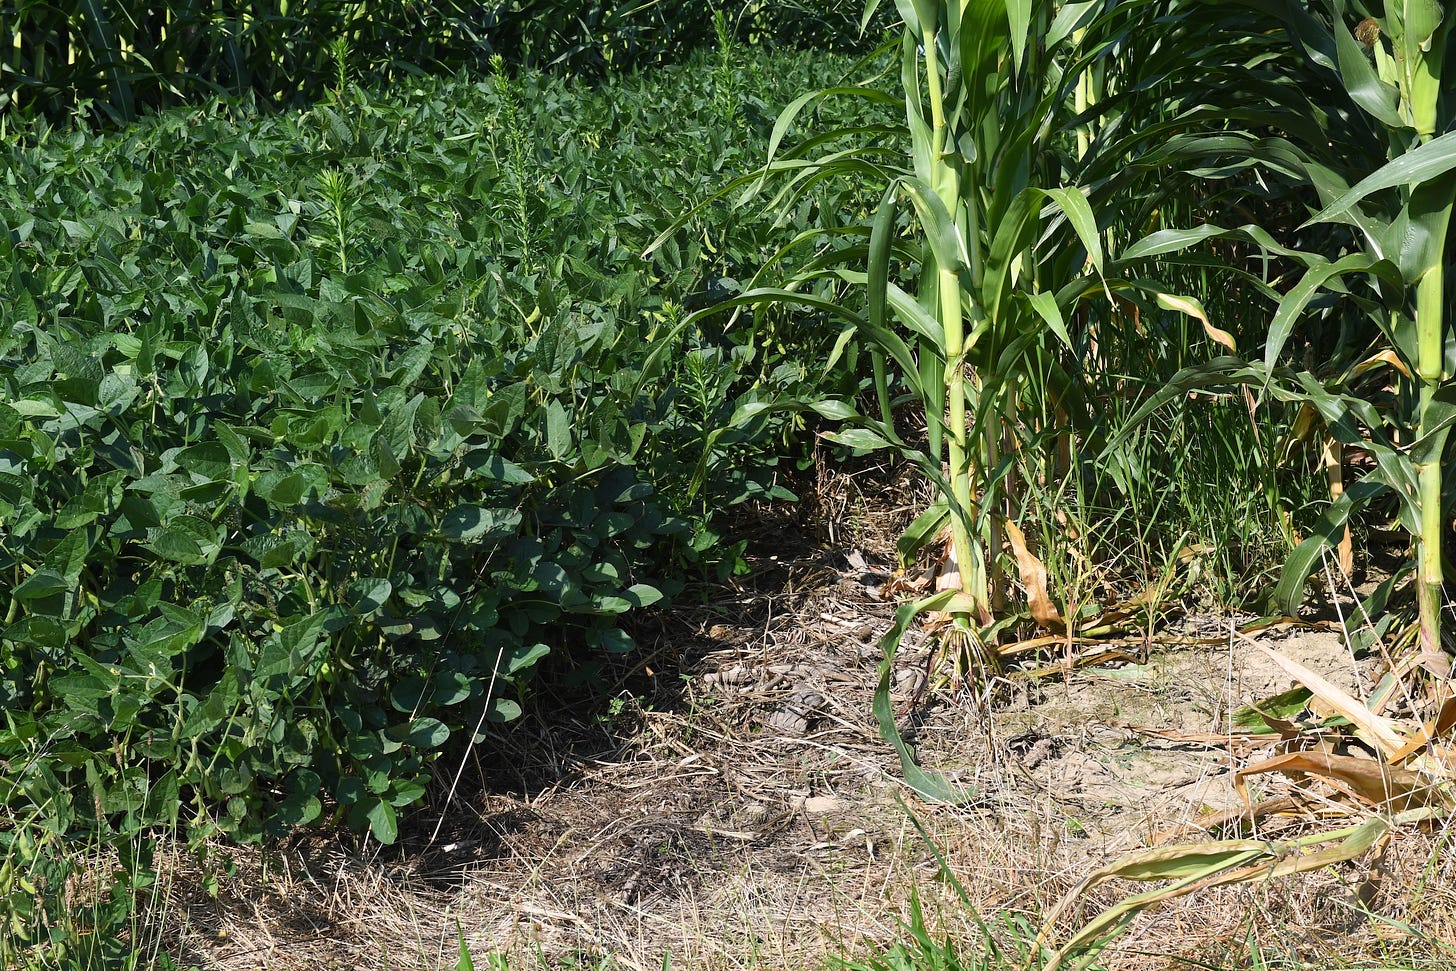 corn and soybean plants on a field filled with crop debris